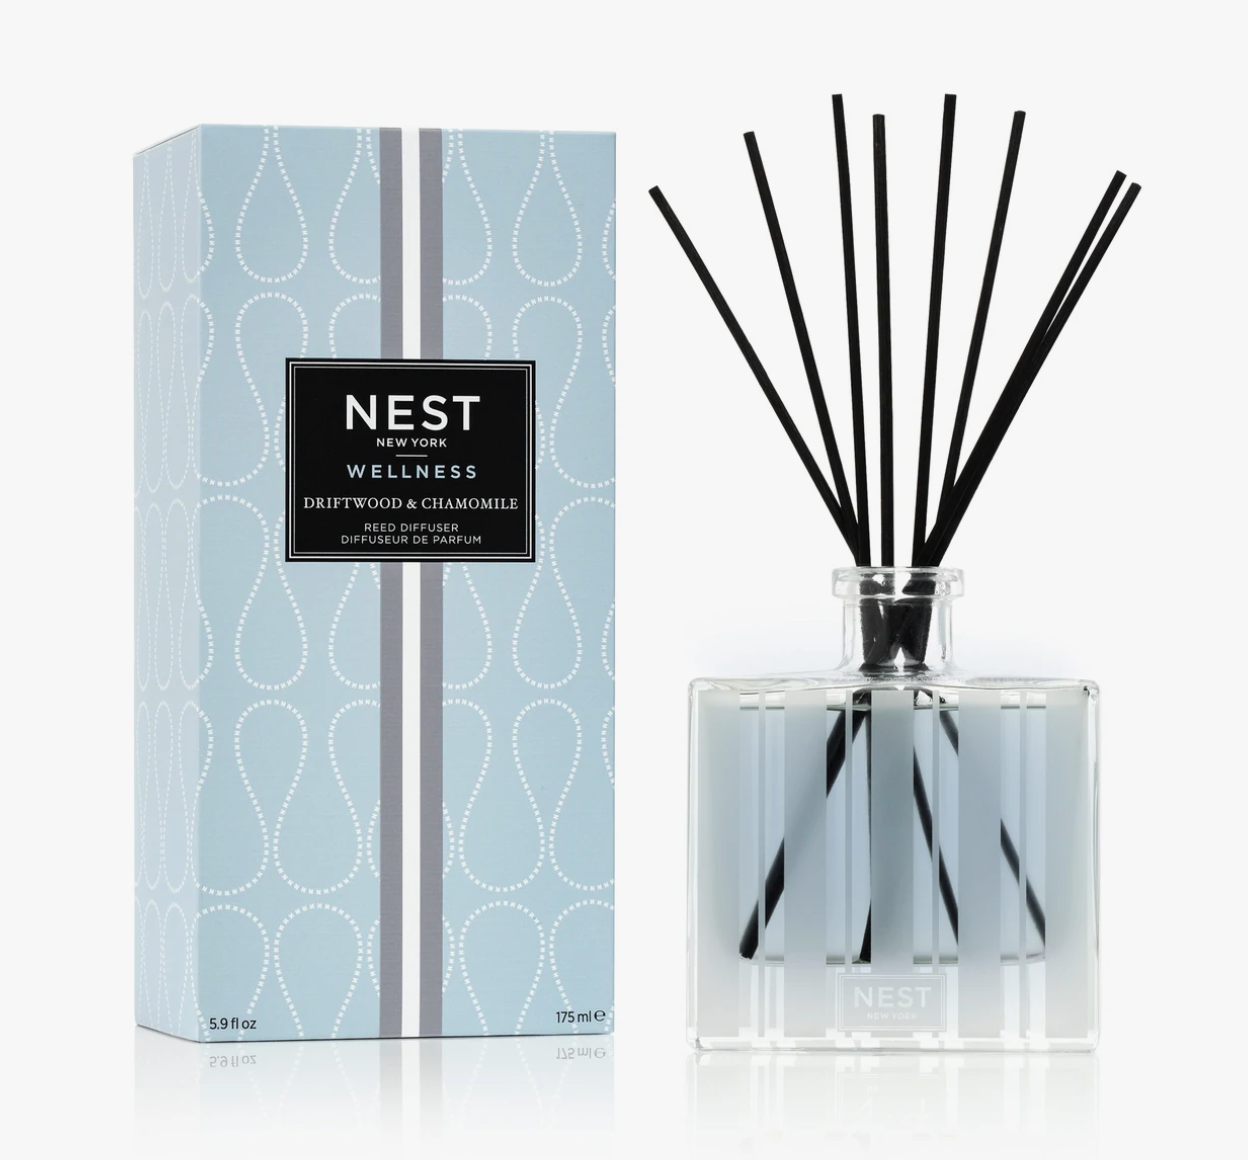 Nest Driftwood & Camomile Diffuser